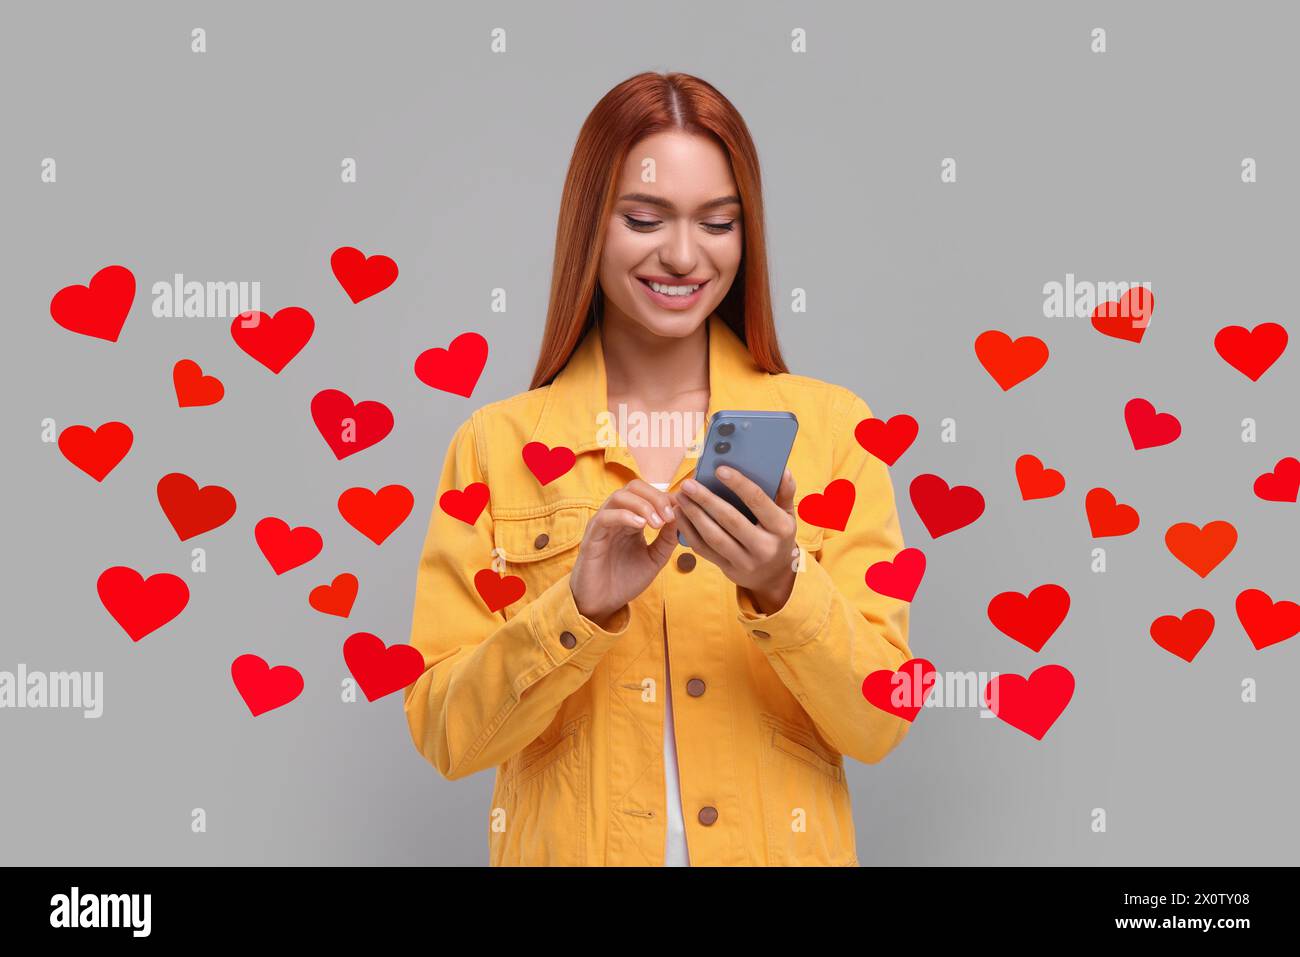 Long distance love. Woman chatting with sweetheart via smartphone on grey background. Hearts flying out of device and swirling around her Stock Photo